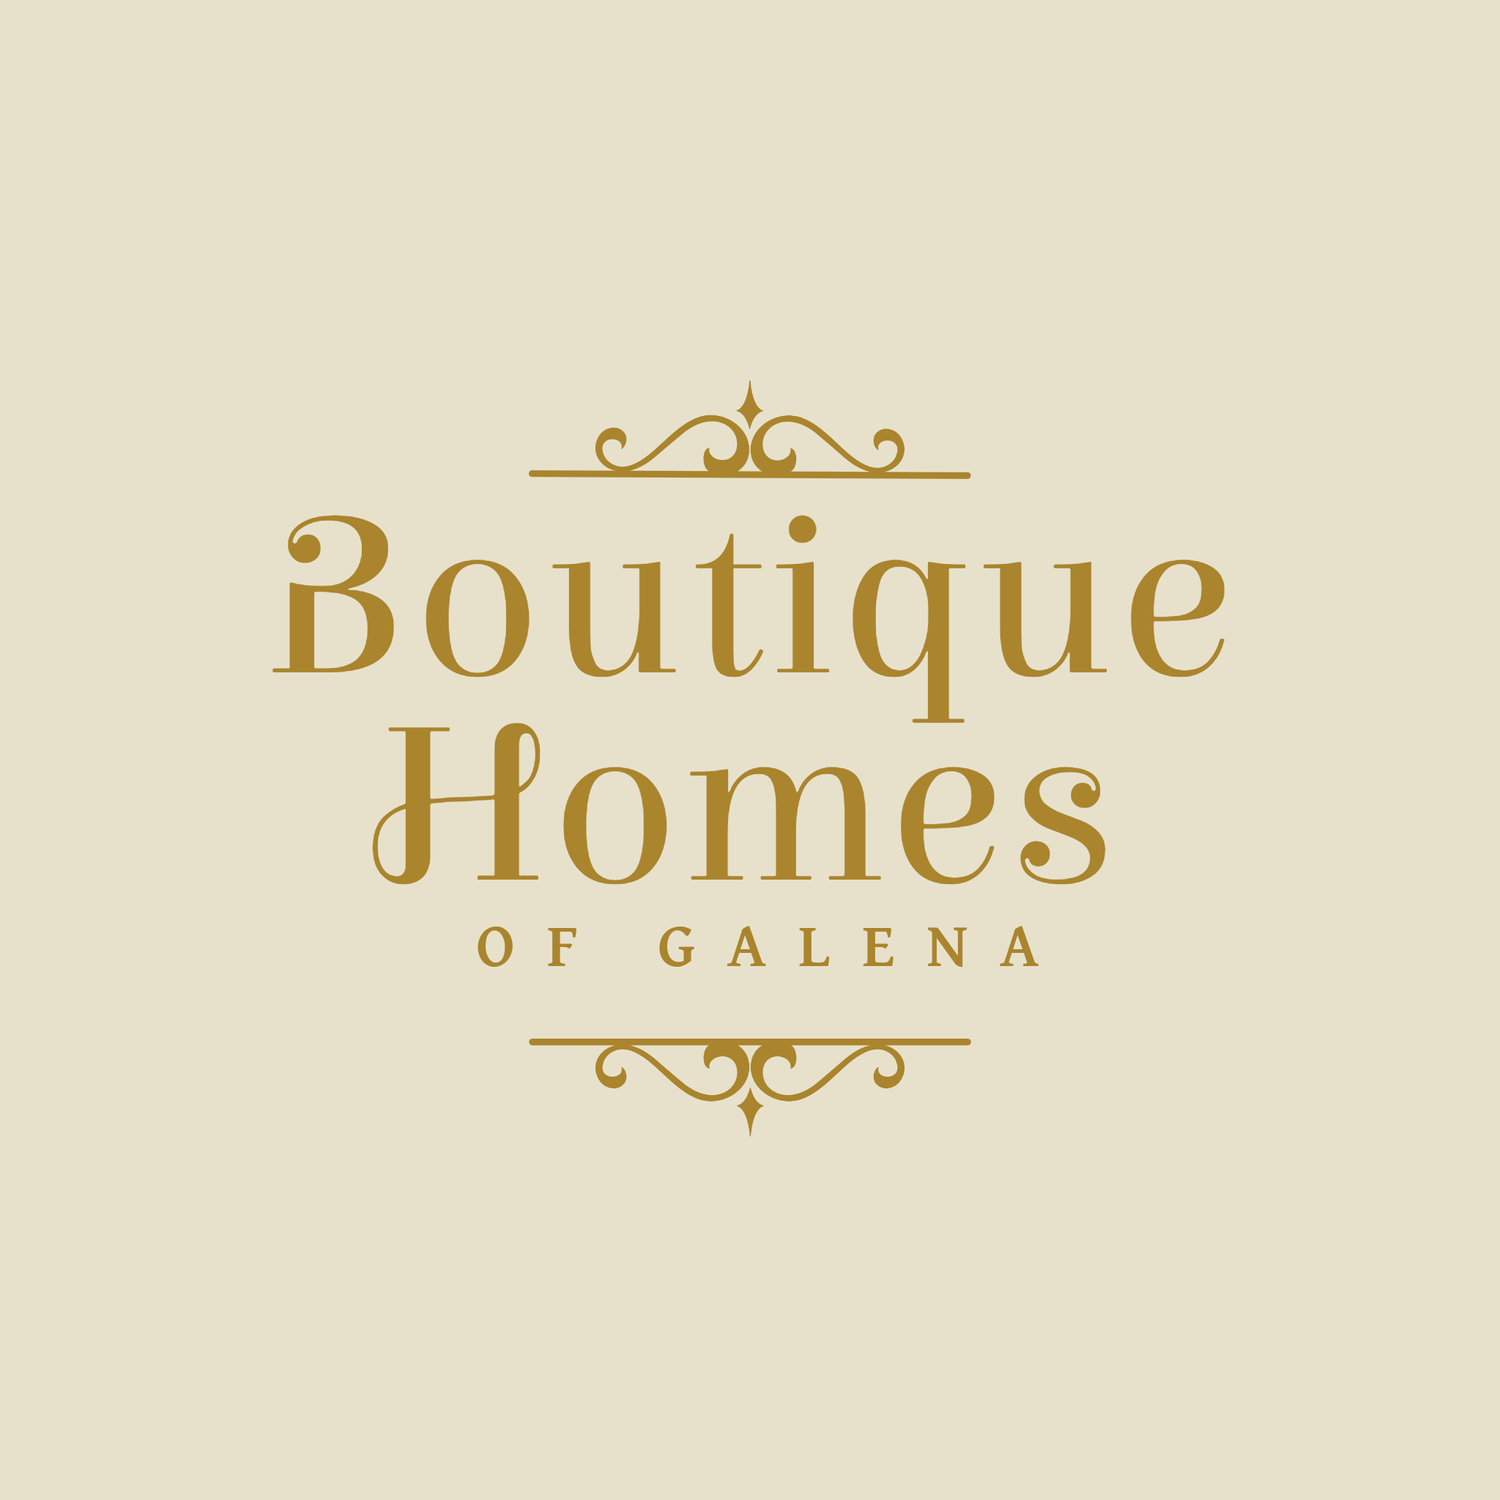 Boutique Homes of Galena